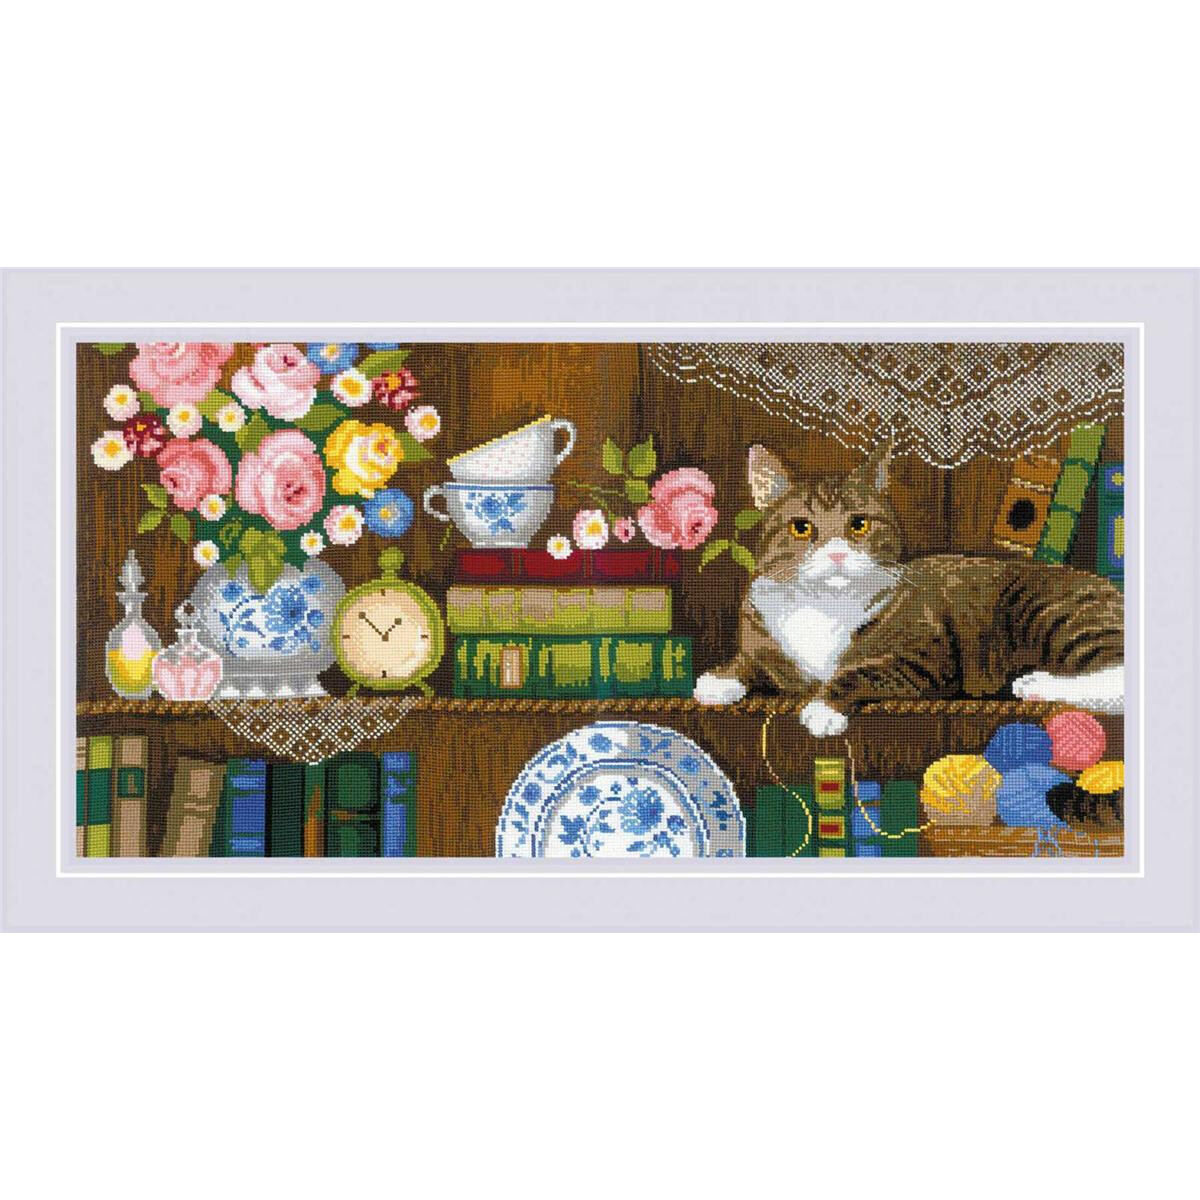 Riolis counted cross stitch kit "Panel/Two Cushions...